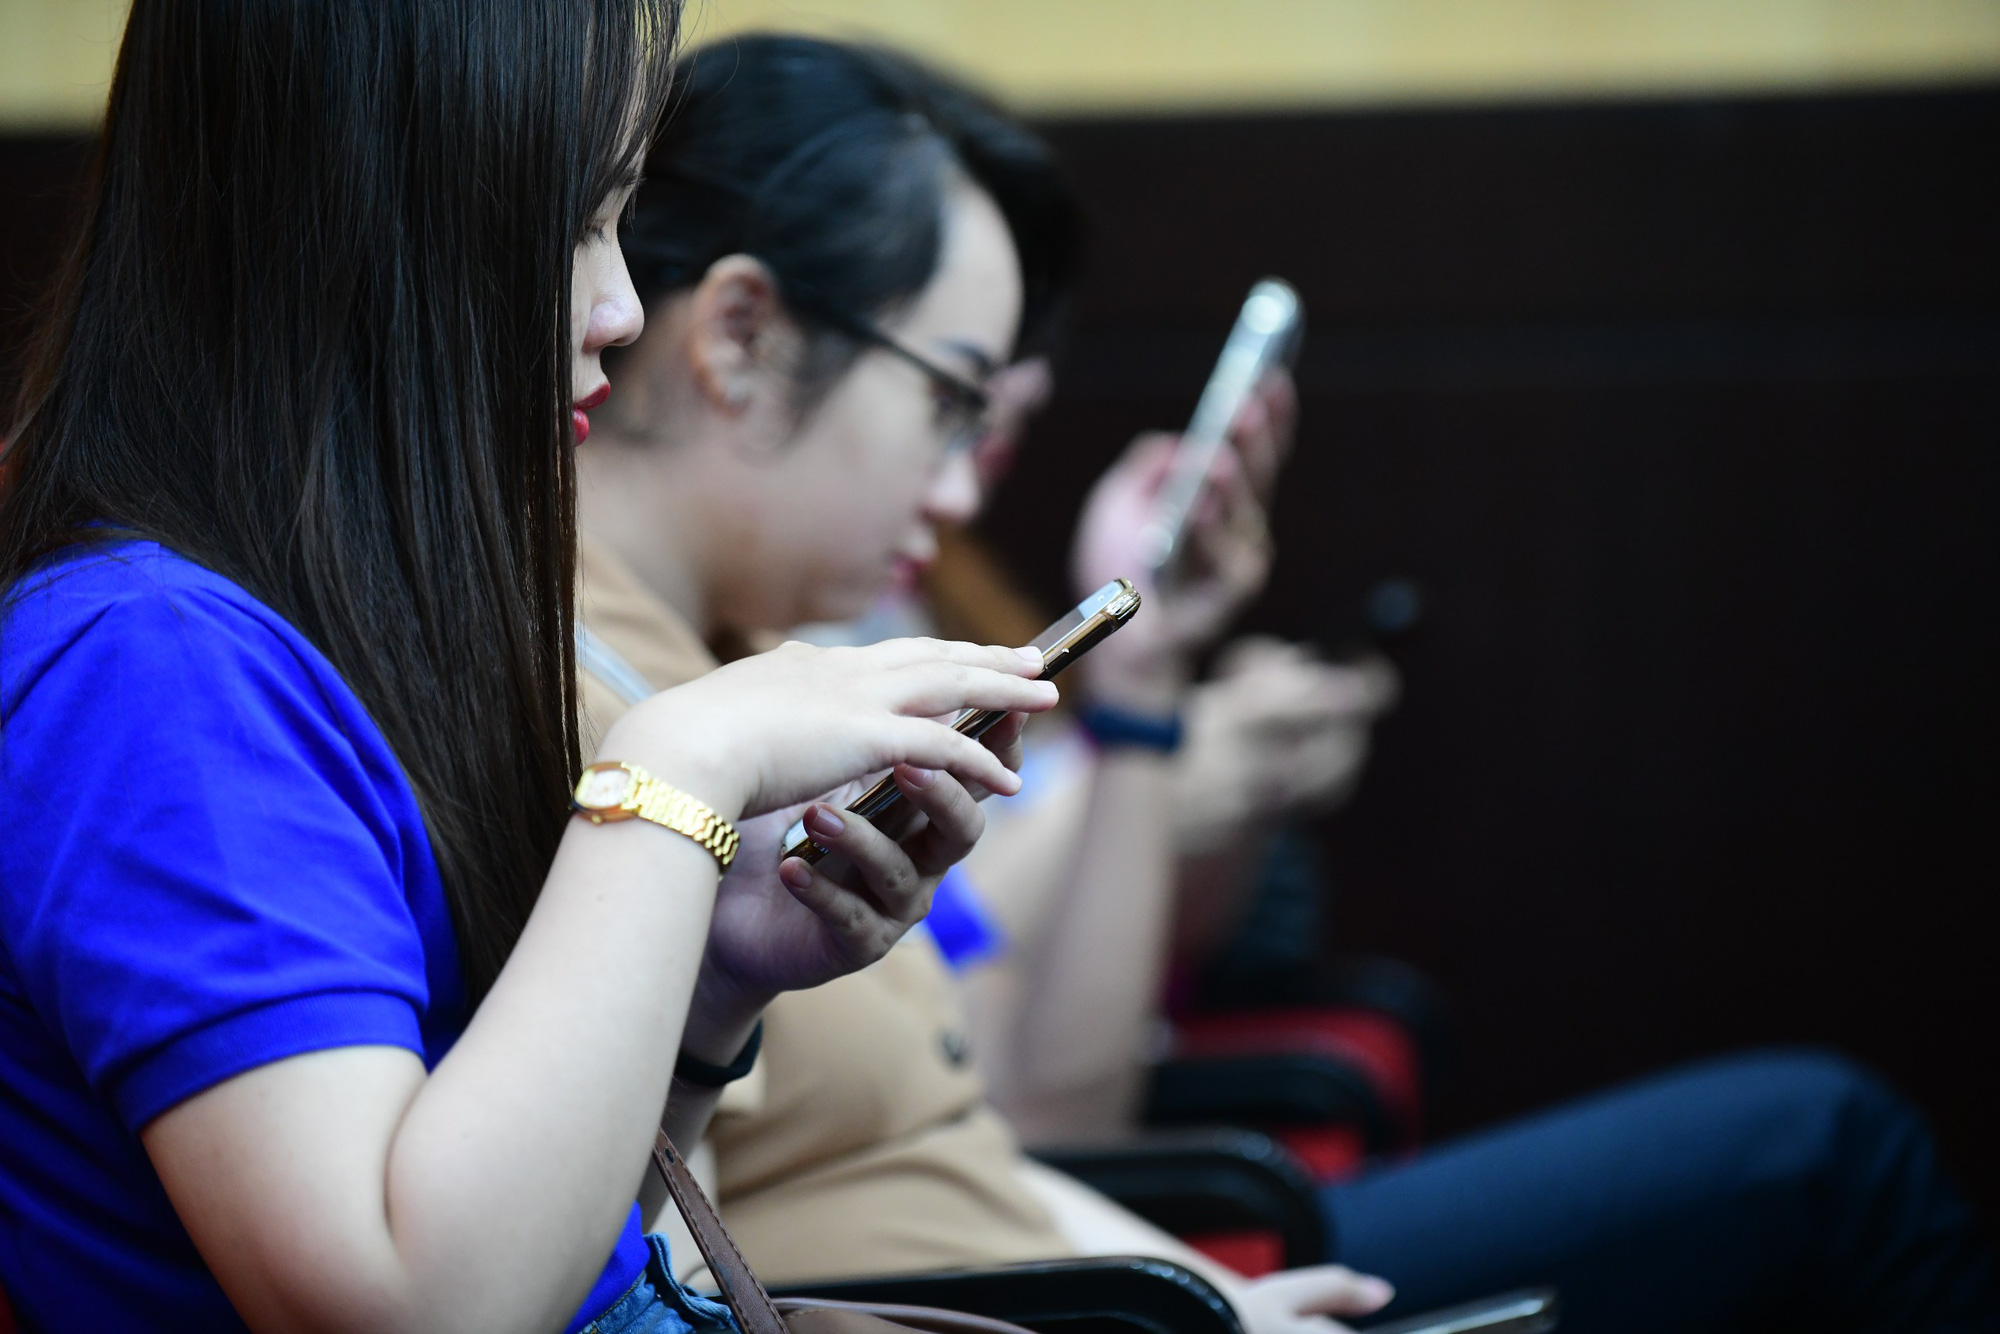 Many people are addicted to the Internet, which affects their daily lives - Photo: Quang Dinh